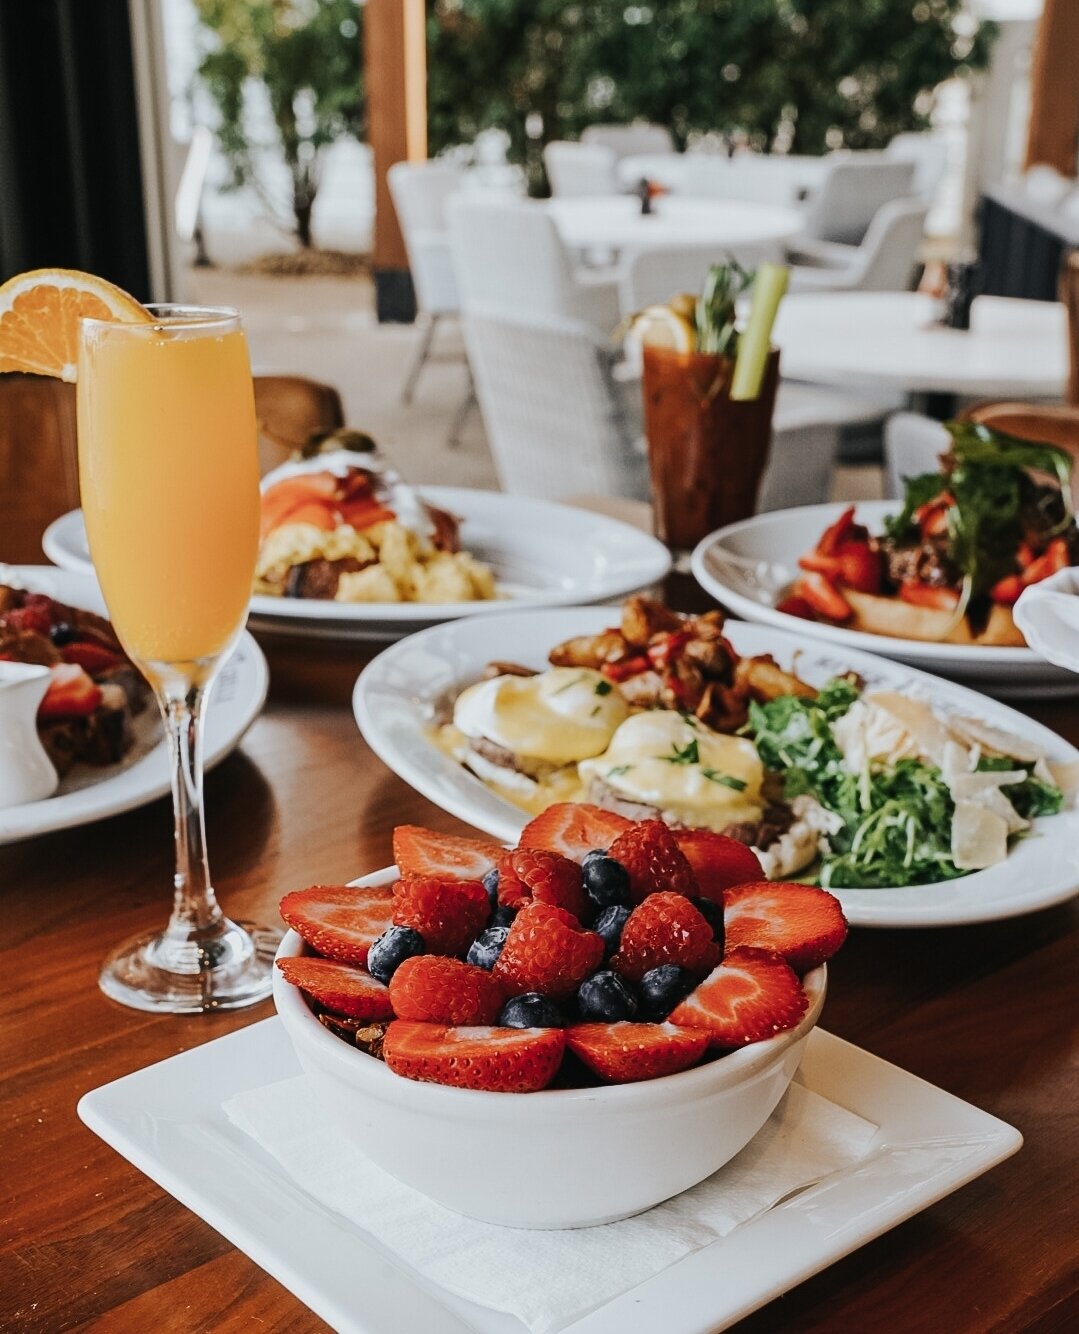 This is what brunch dreams are made of 🍓